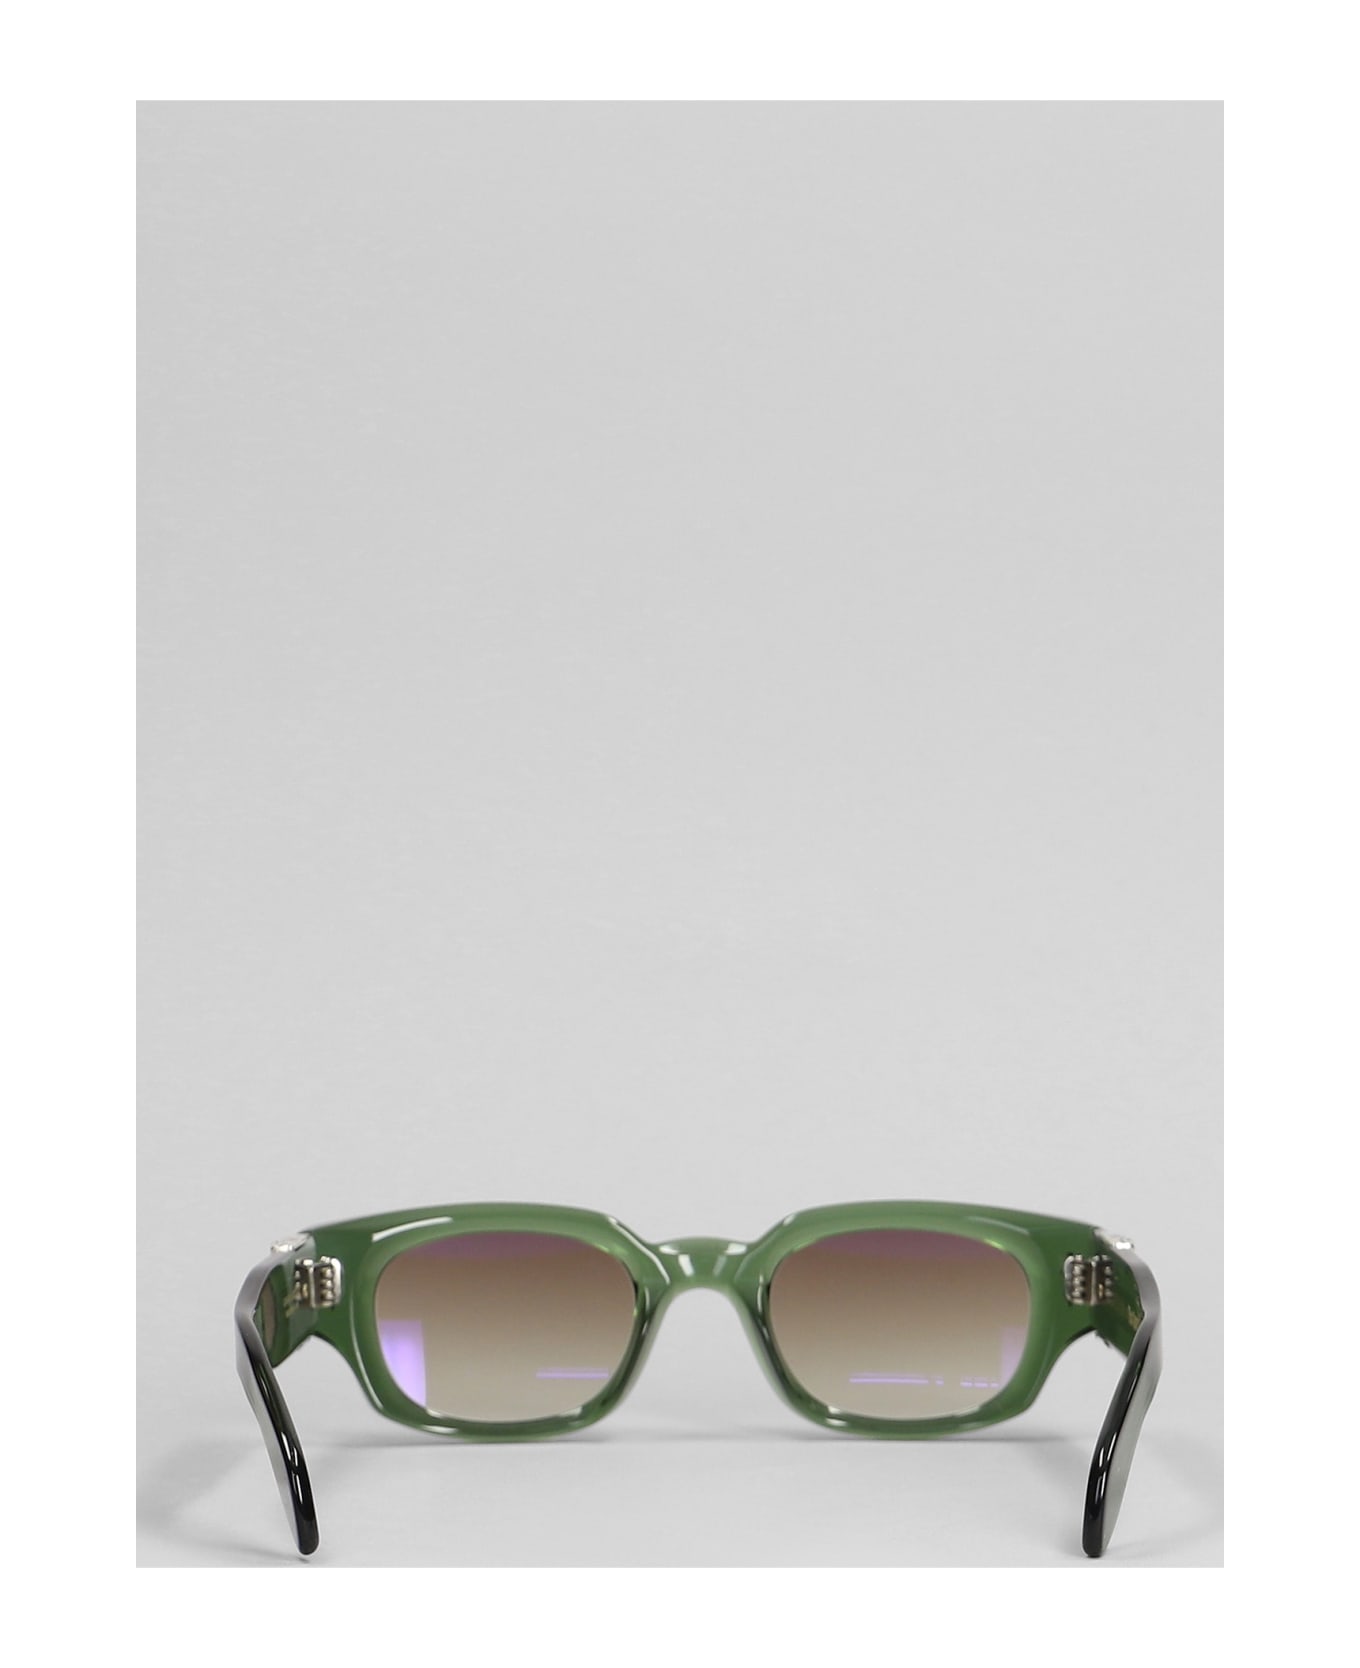 Cutler and Gross The Great Frog Sunglasses In Green Acetate - green